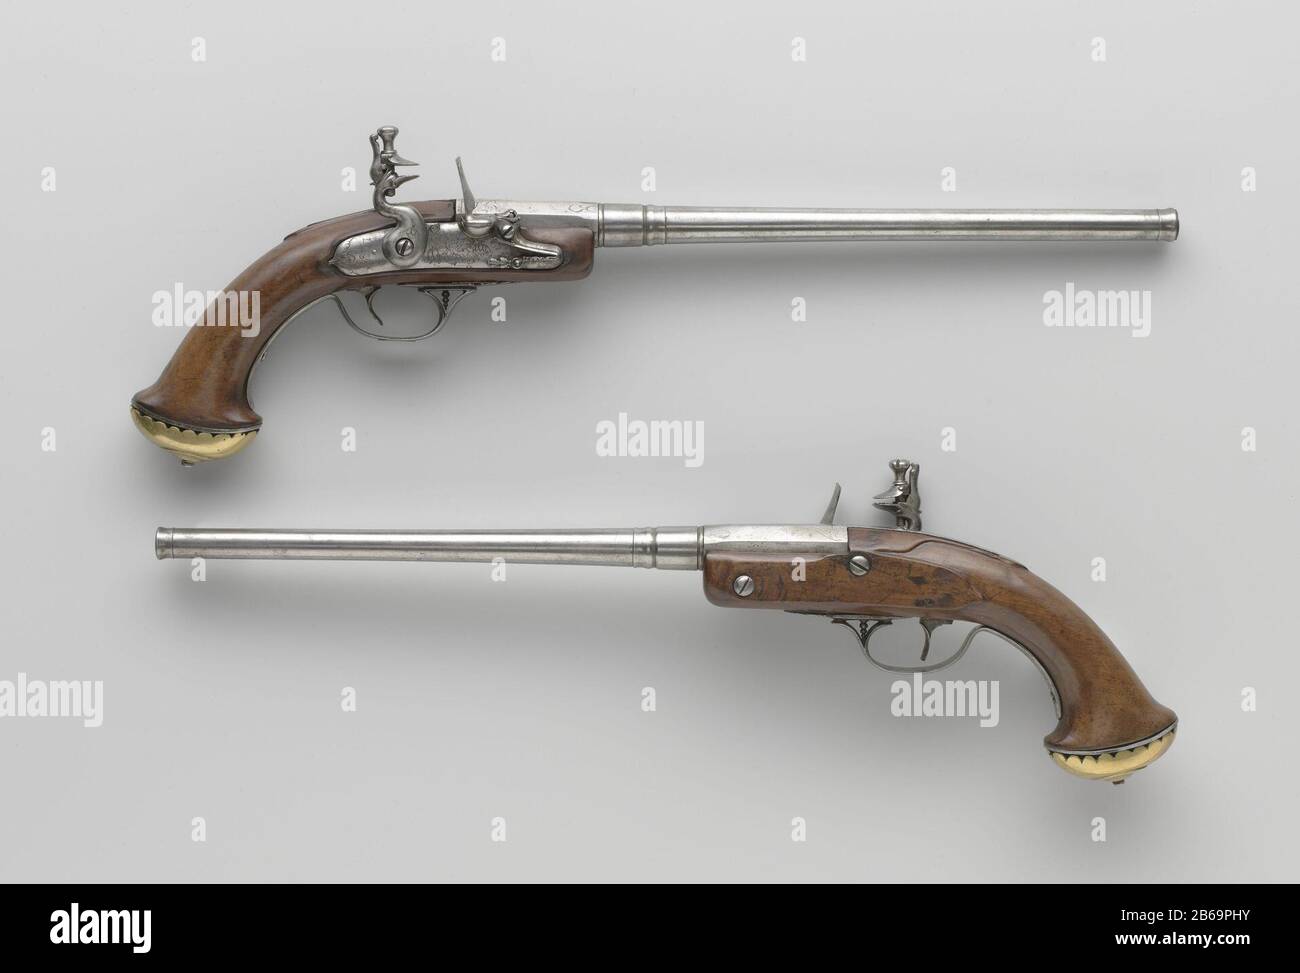 Page 3 - Flint Gun High Resolution Stock Photography and Images - Alamy